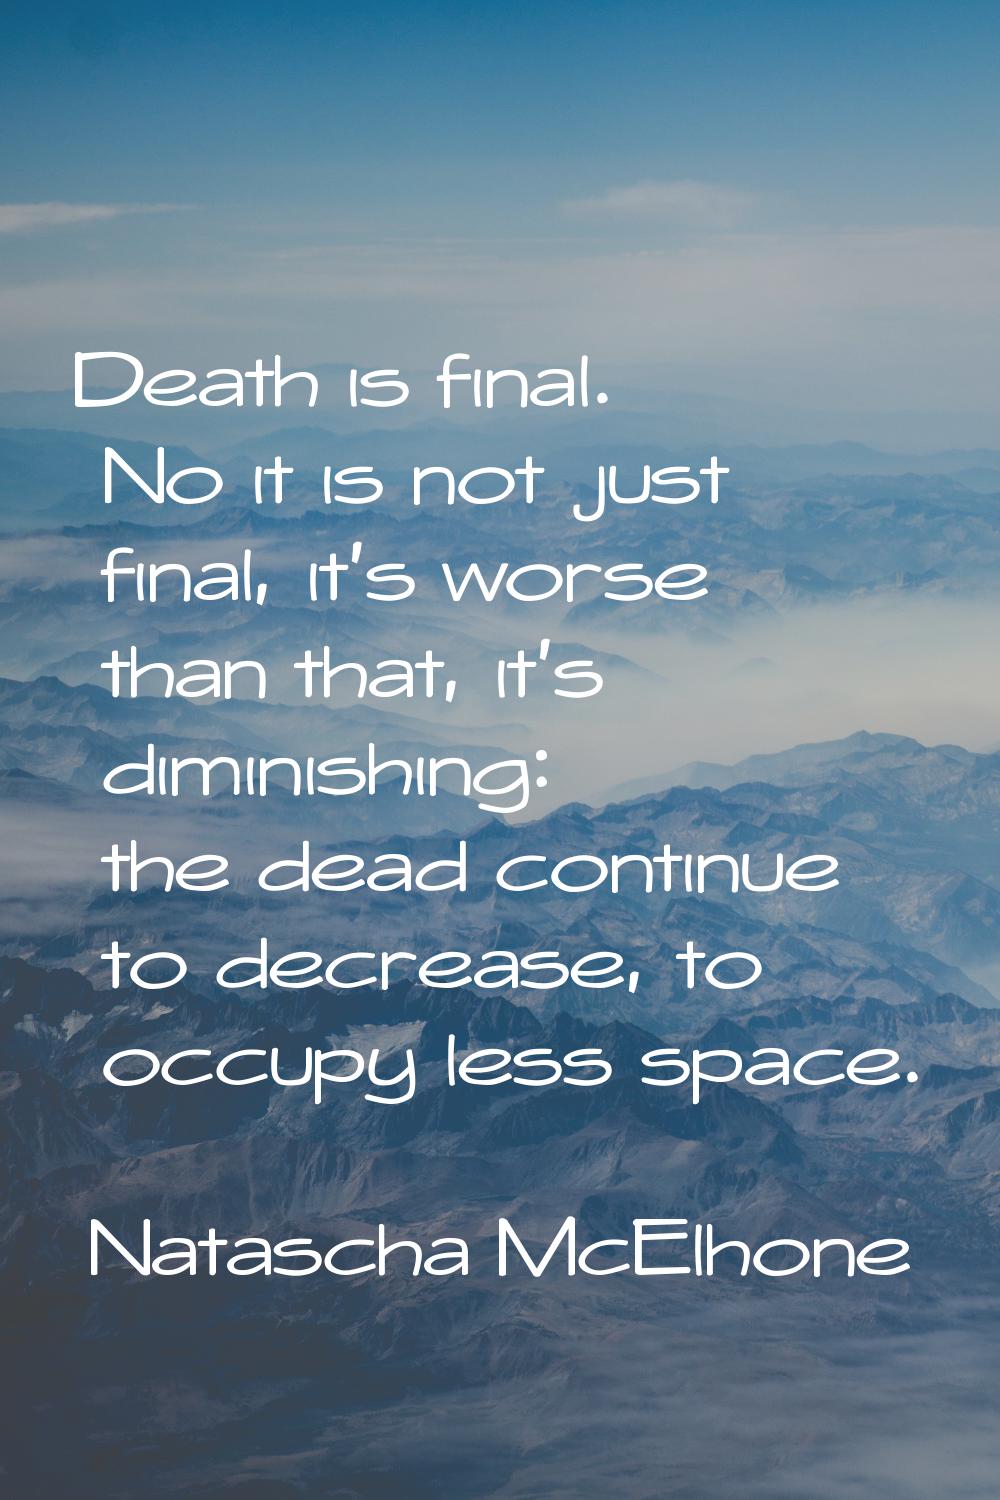 Death is final. No it is not just final, it's worse than that, it's diminishing: the dead continue 